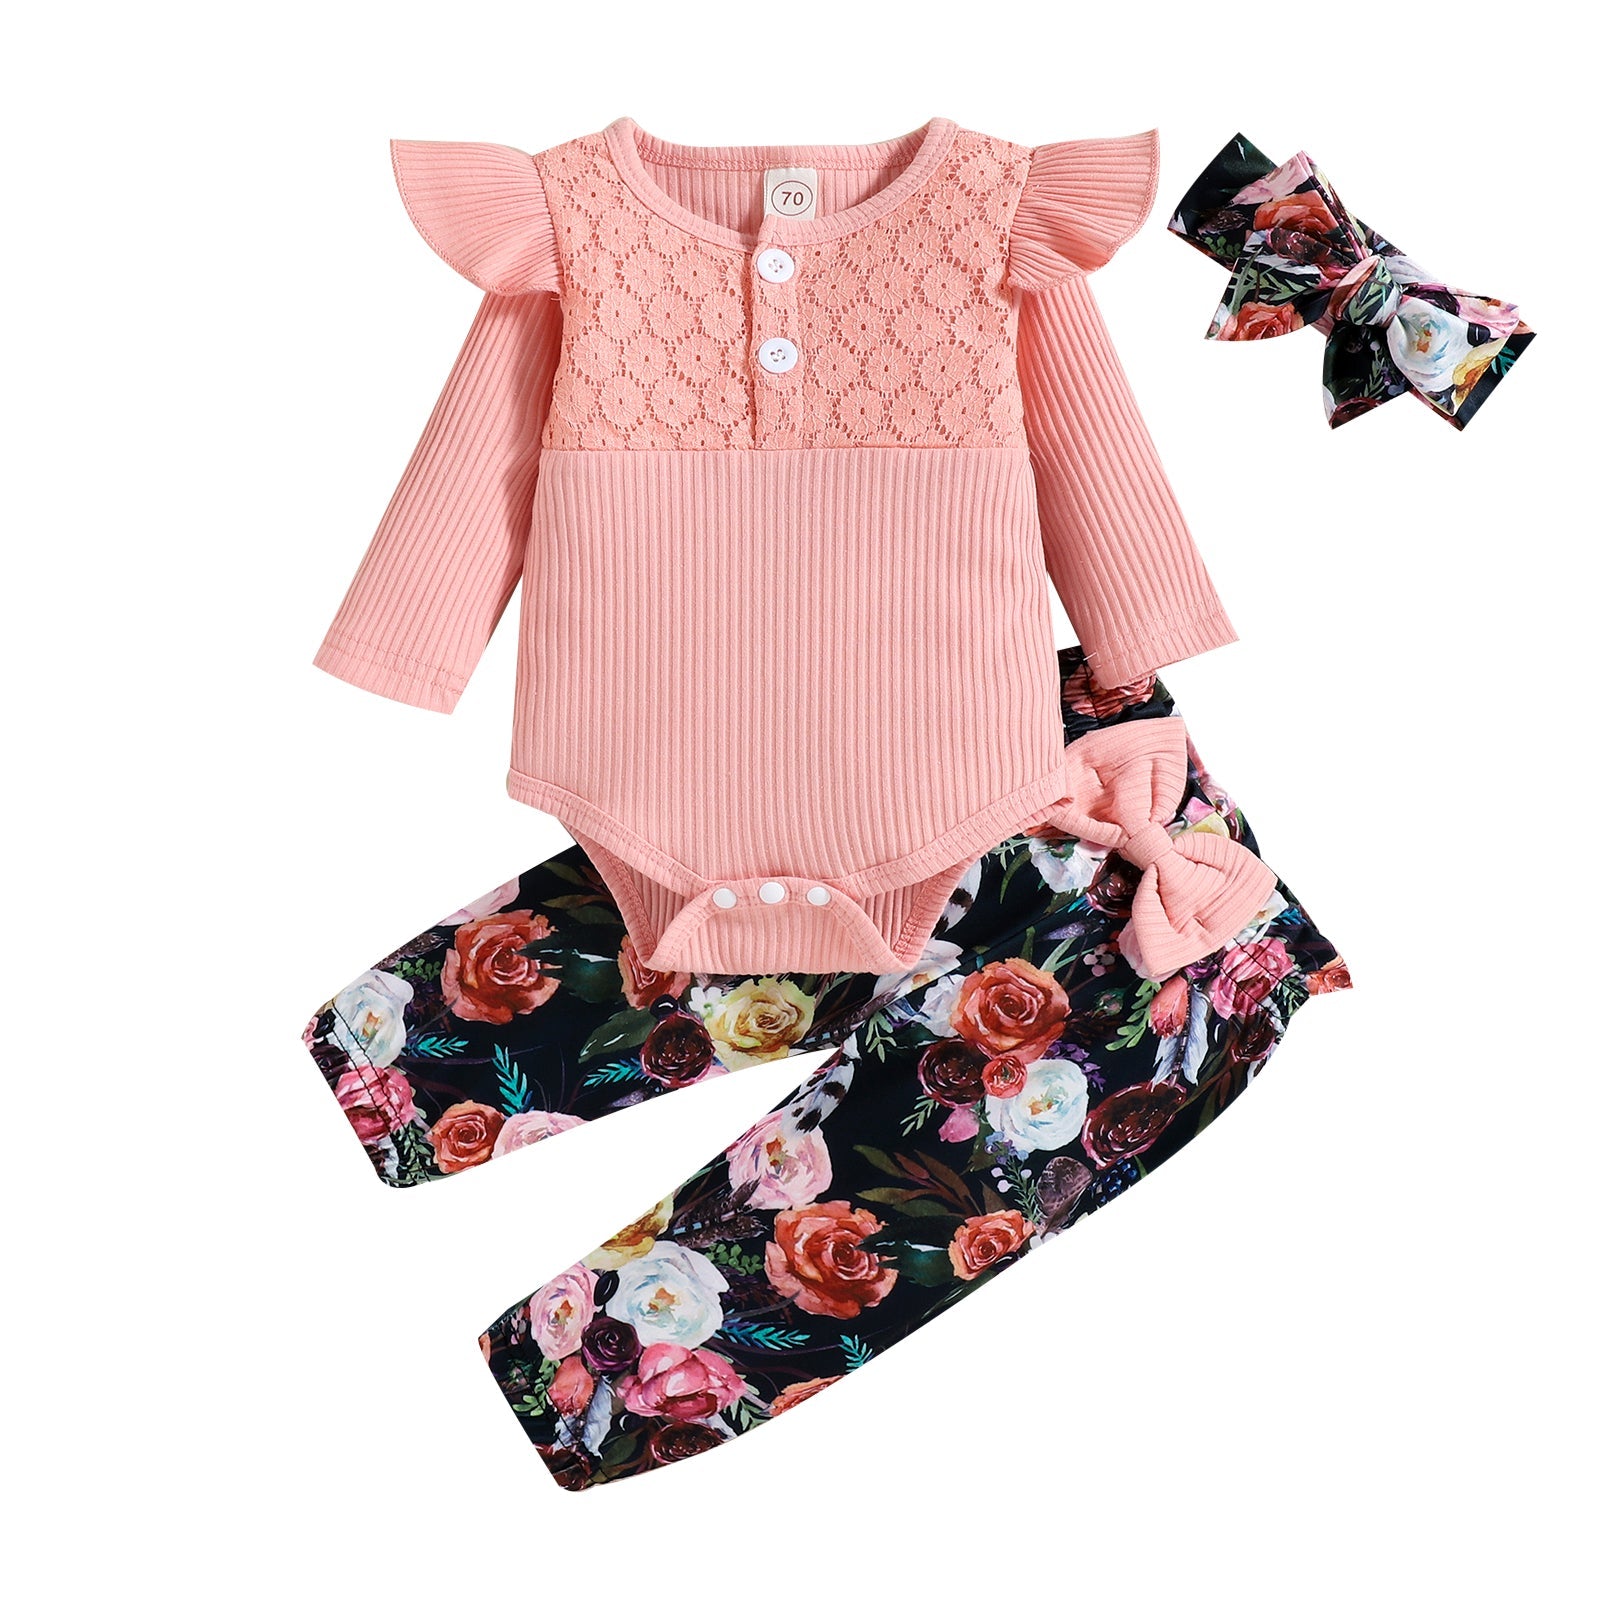 Baby Lace Rompers 3-Piece Sets.